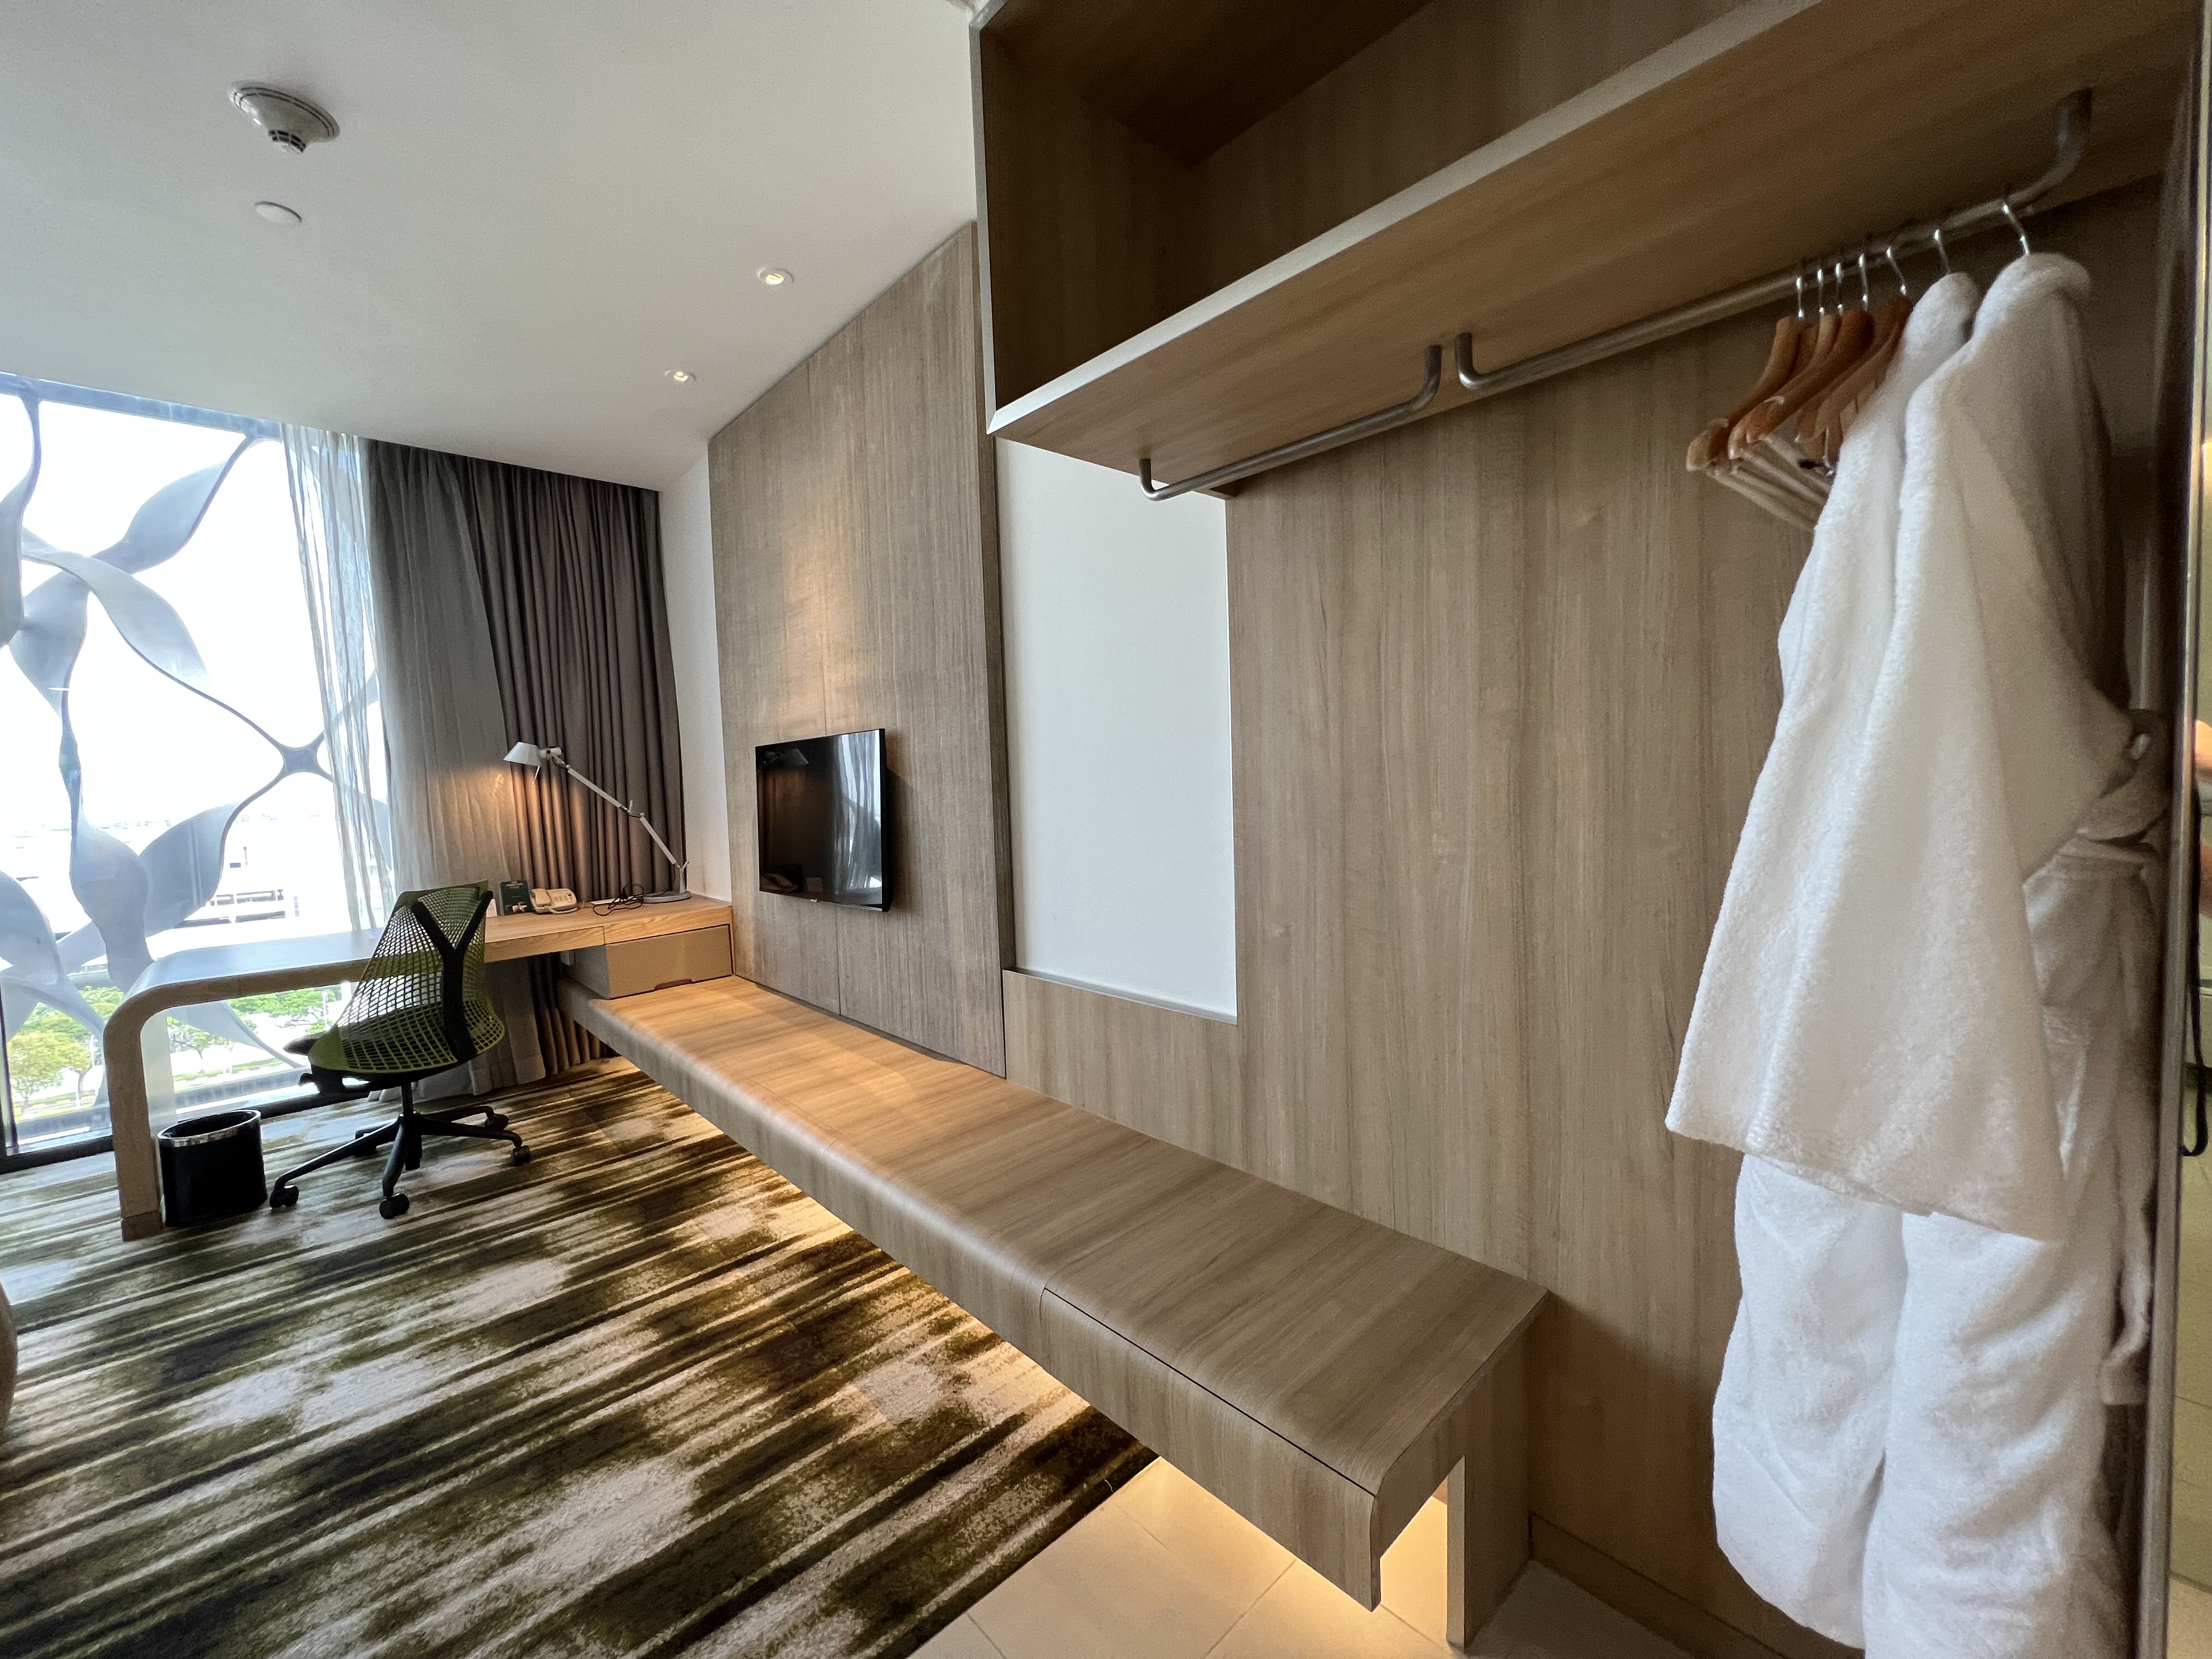 a room with a tv and a white robe on a rack